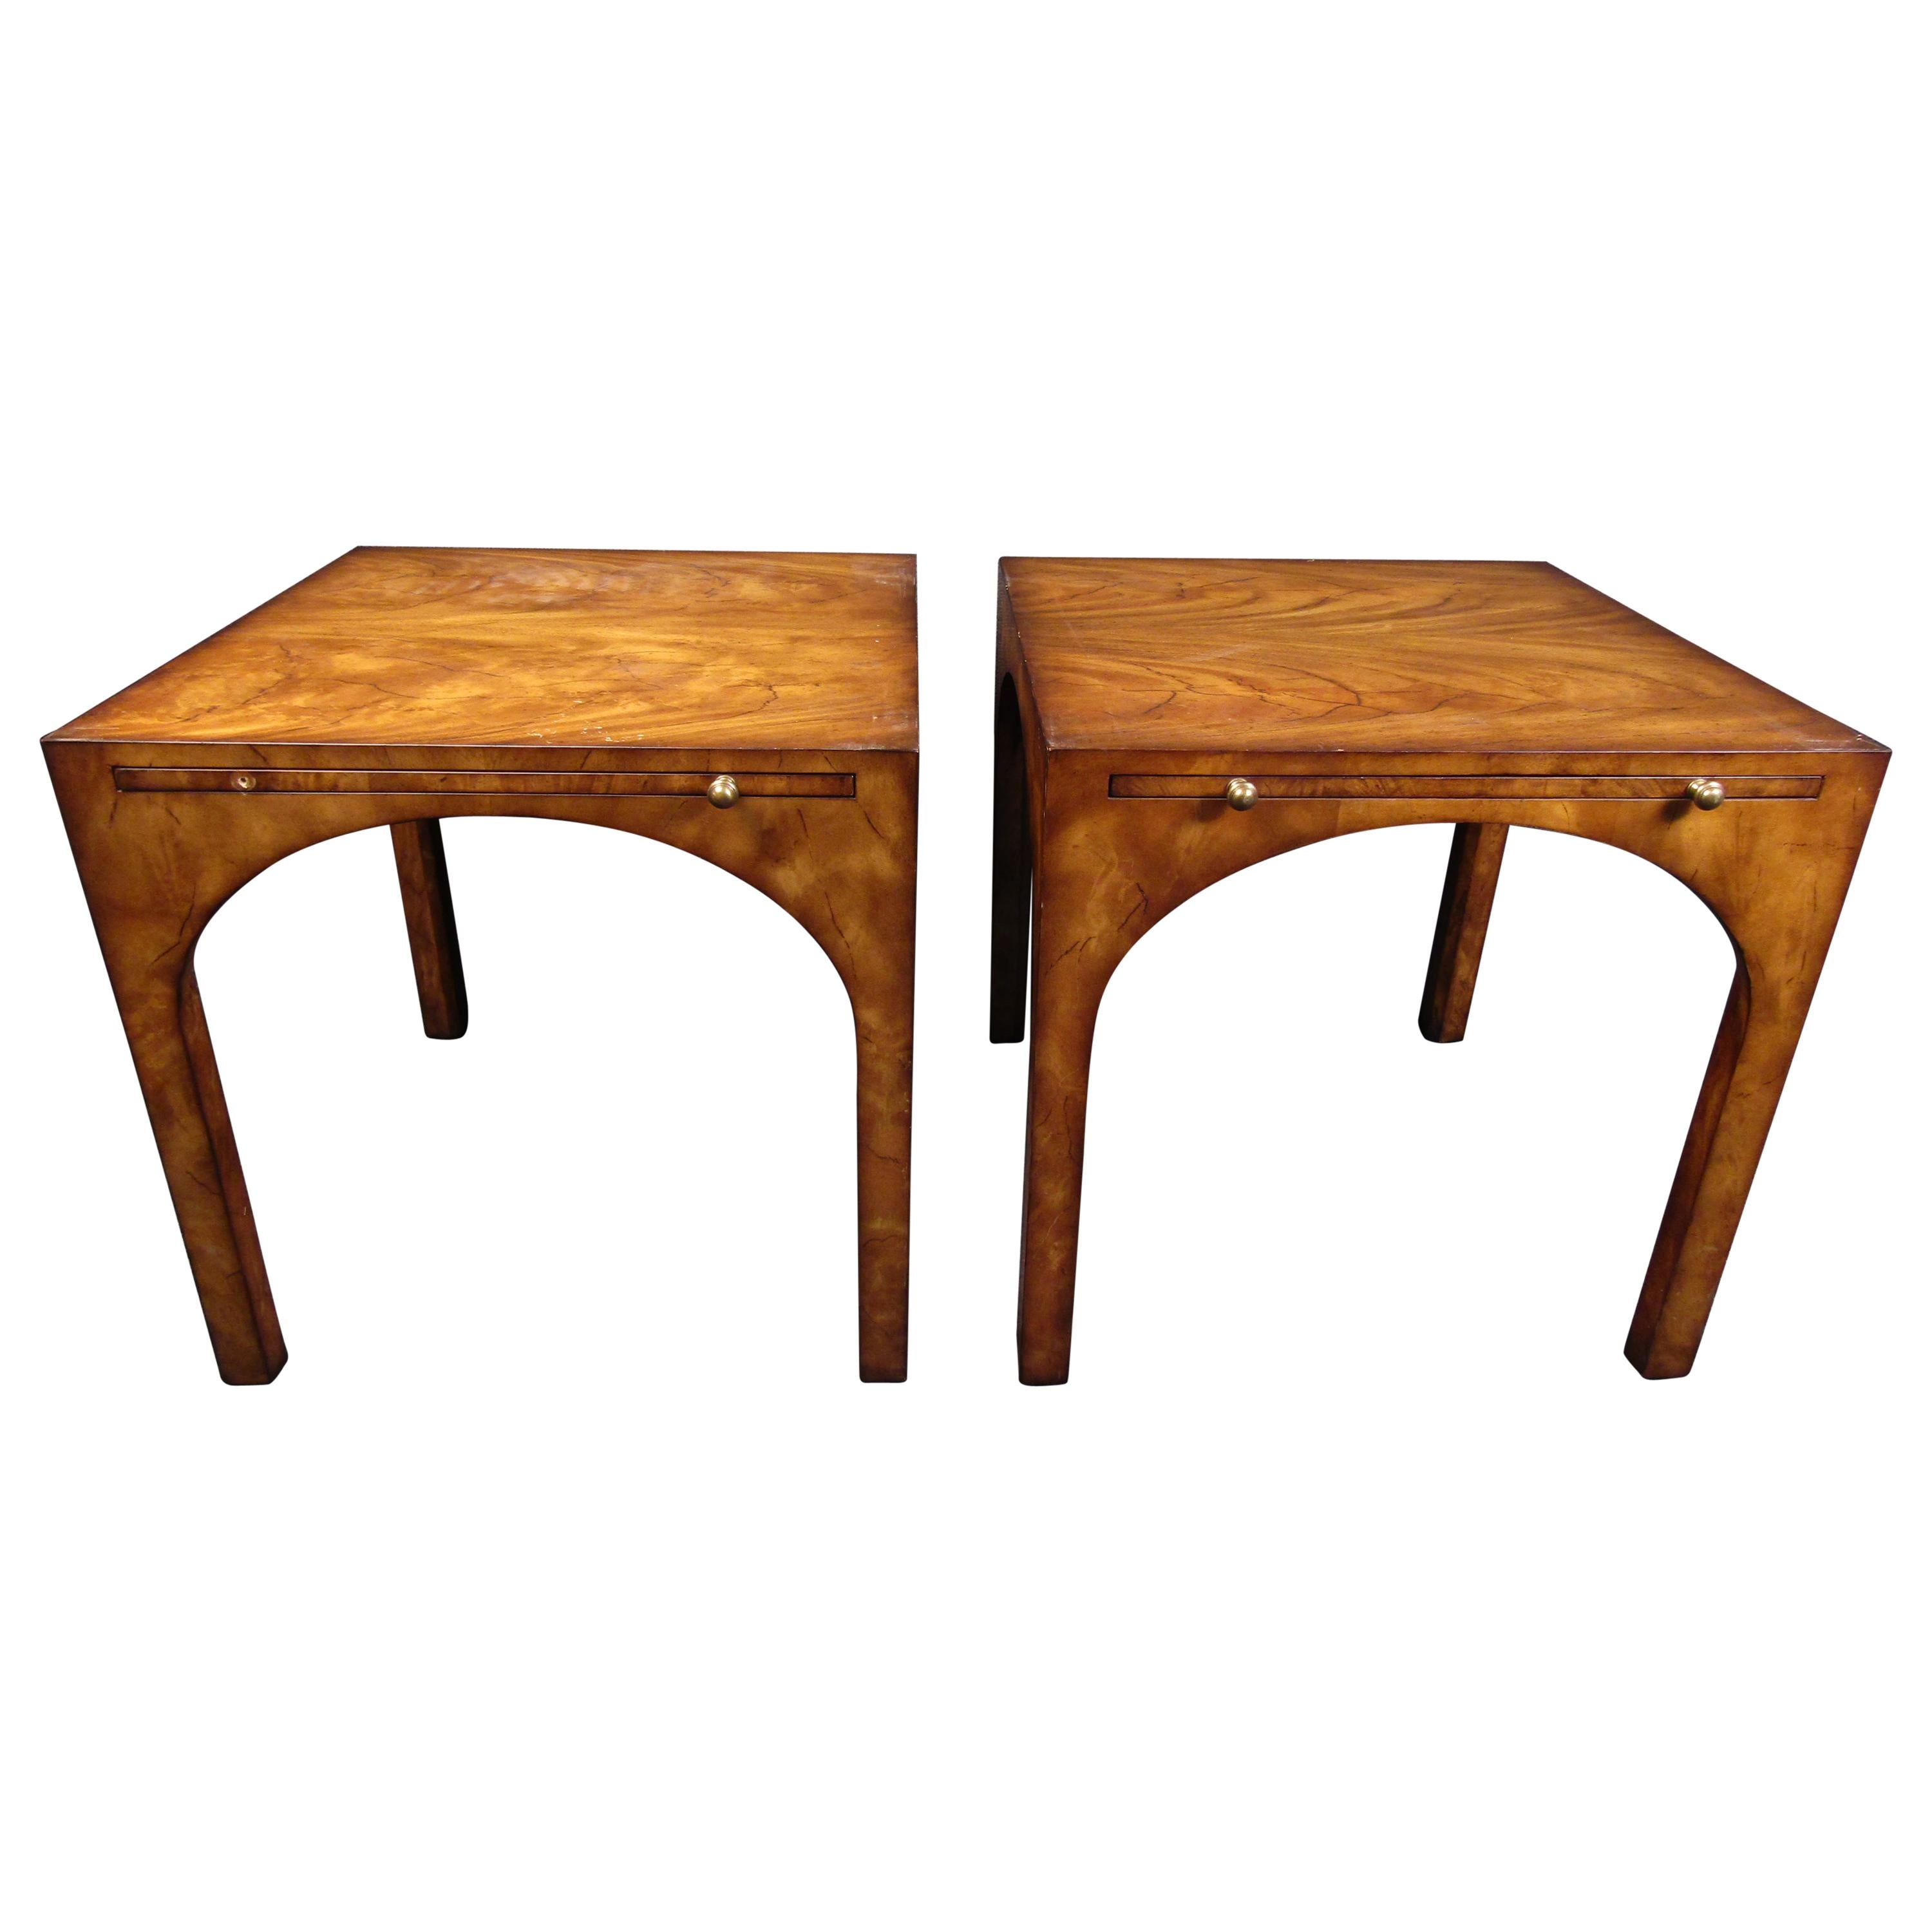 Pair of Mid-Century Modern End Tables by Baker Furniture Co.